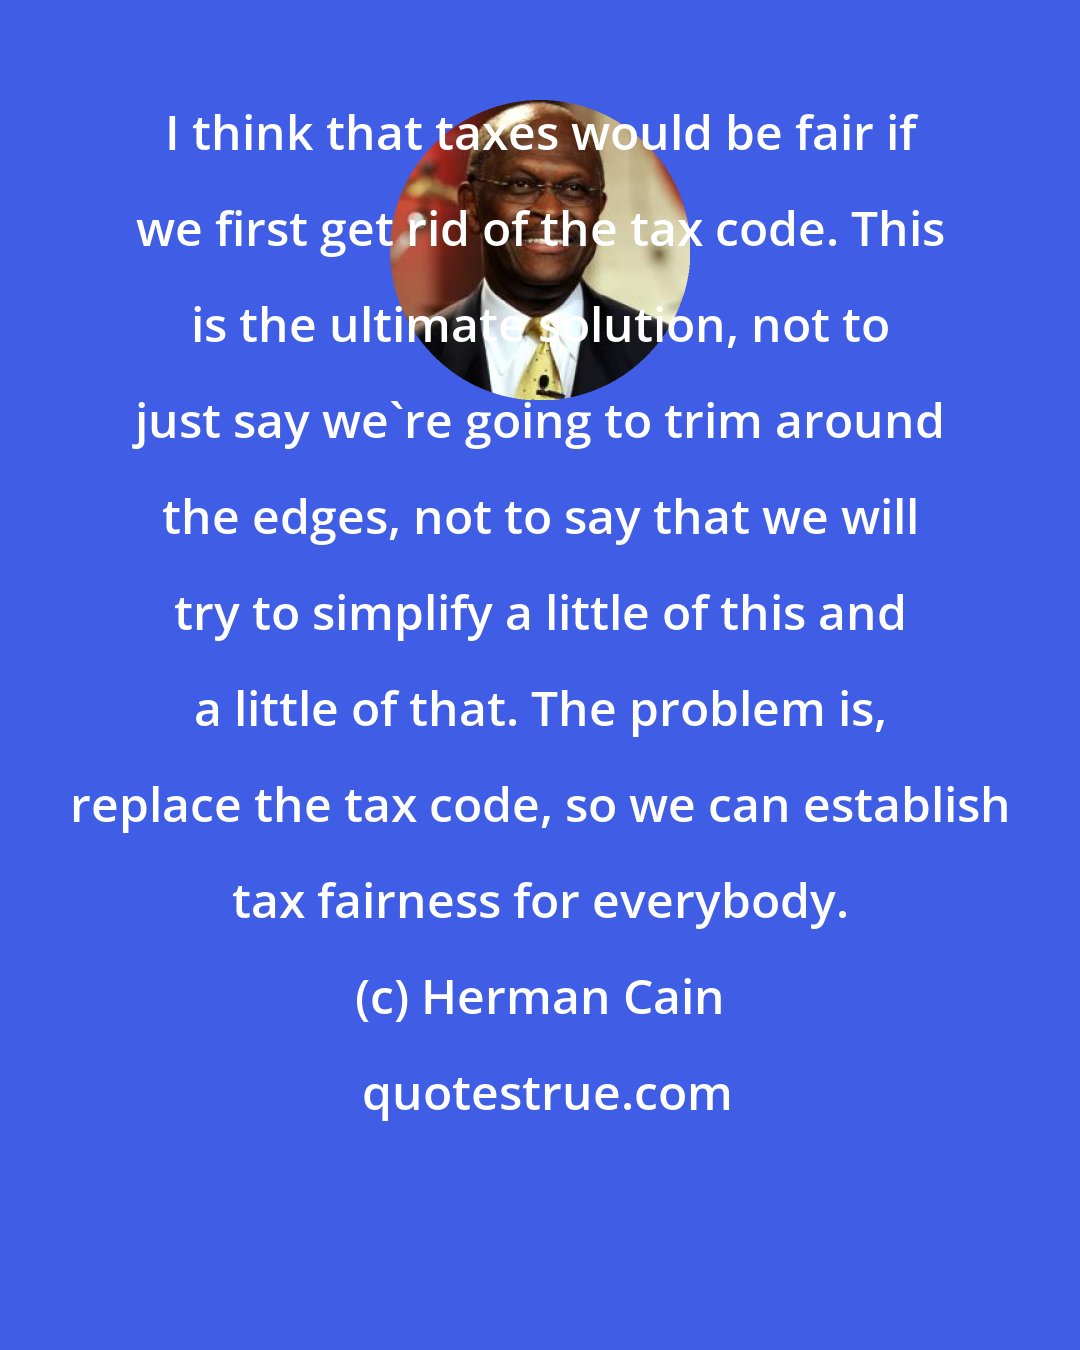 Herman Cain: I think that taxes would be fair if we first get rid of the tax code. This is the ultimate solution, not to just say we're going to trim around the edges, not to say that we will try to simplify a little of this and a little of that. The problem is, replace the tax code, so we can establish tax fairness for everybody.